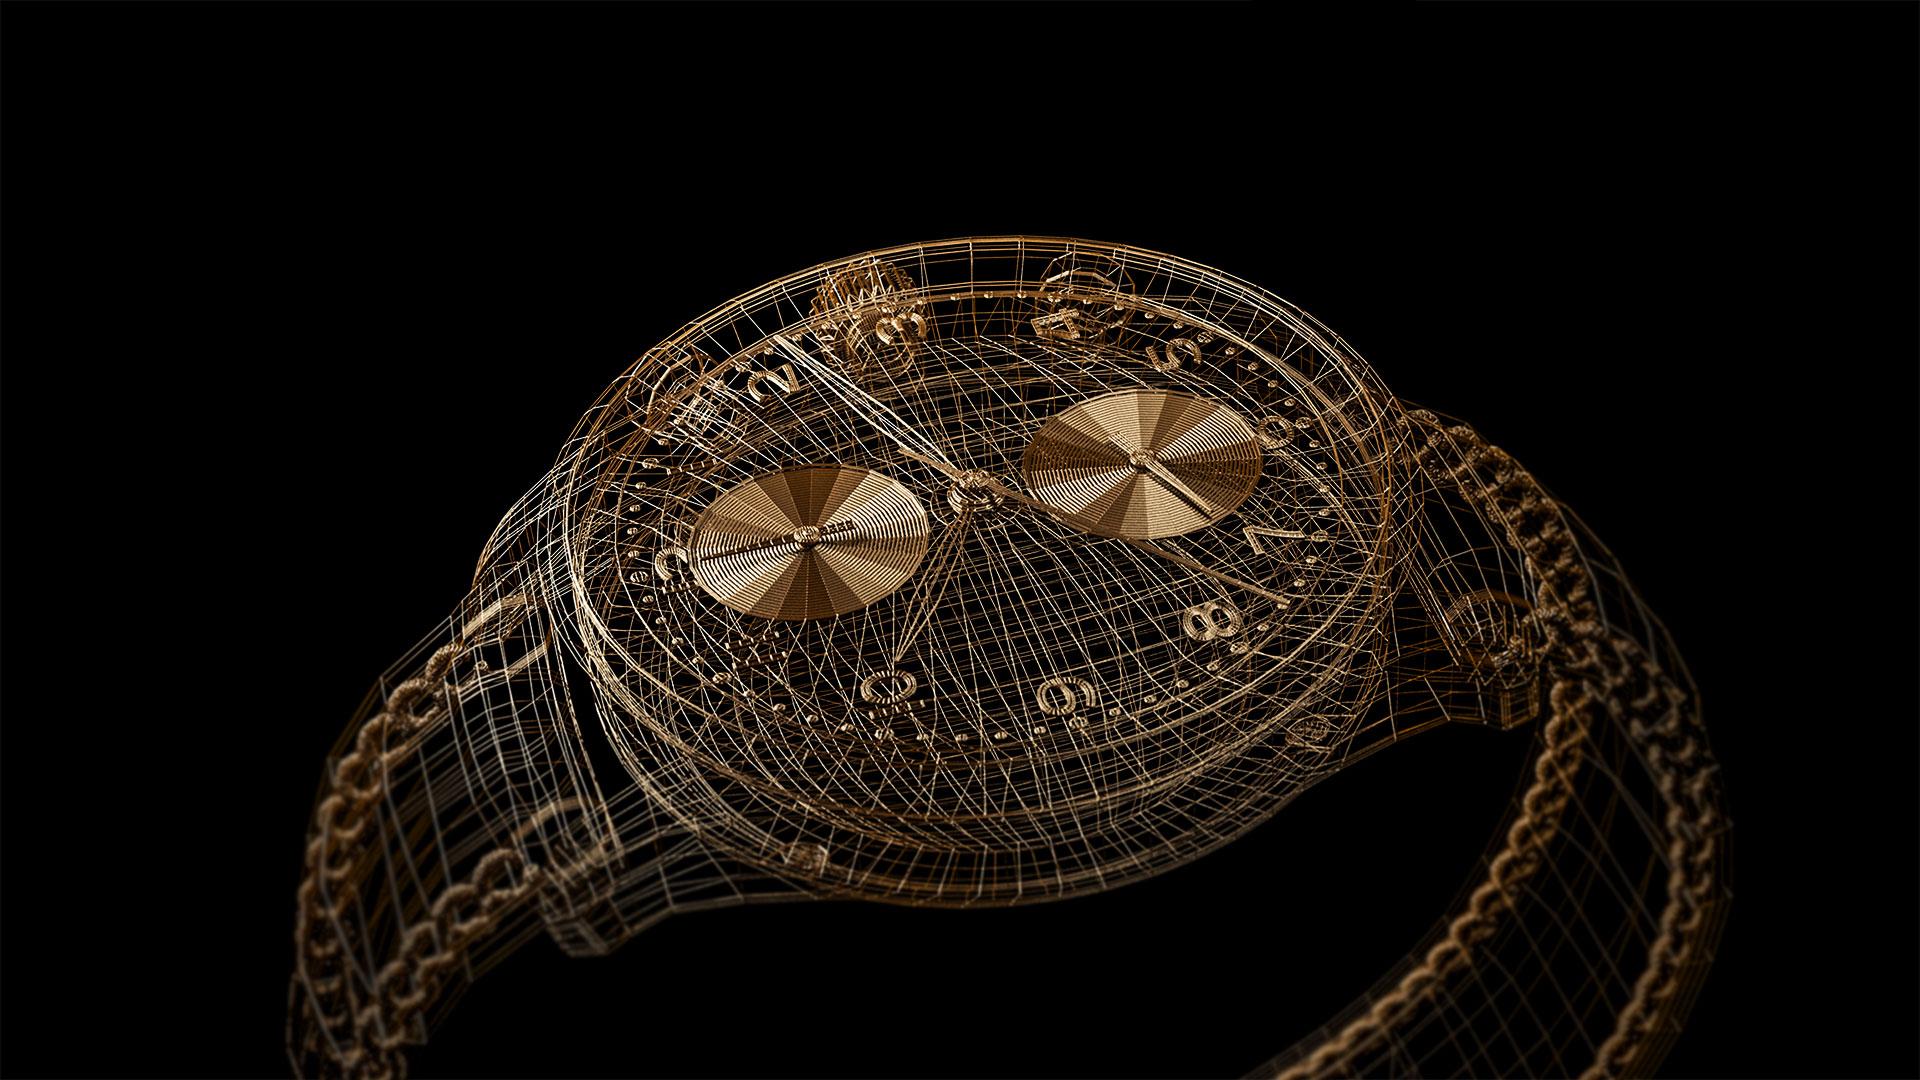 Cinema 4D Artist Adam Wilkes created a 3D golden watch wireframe for Style frames project